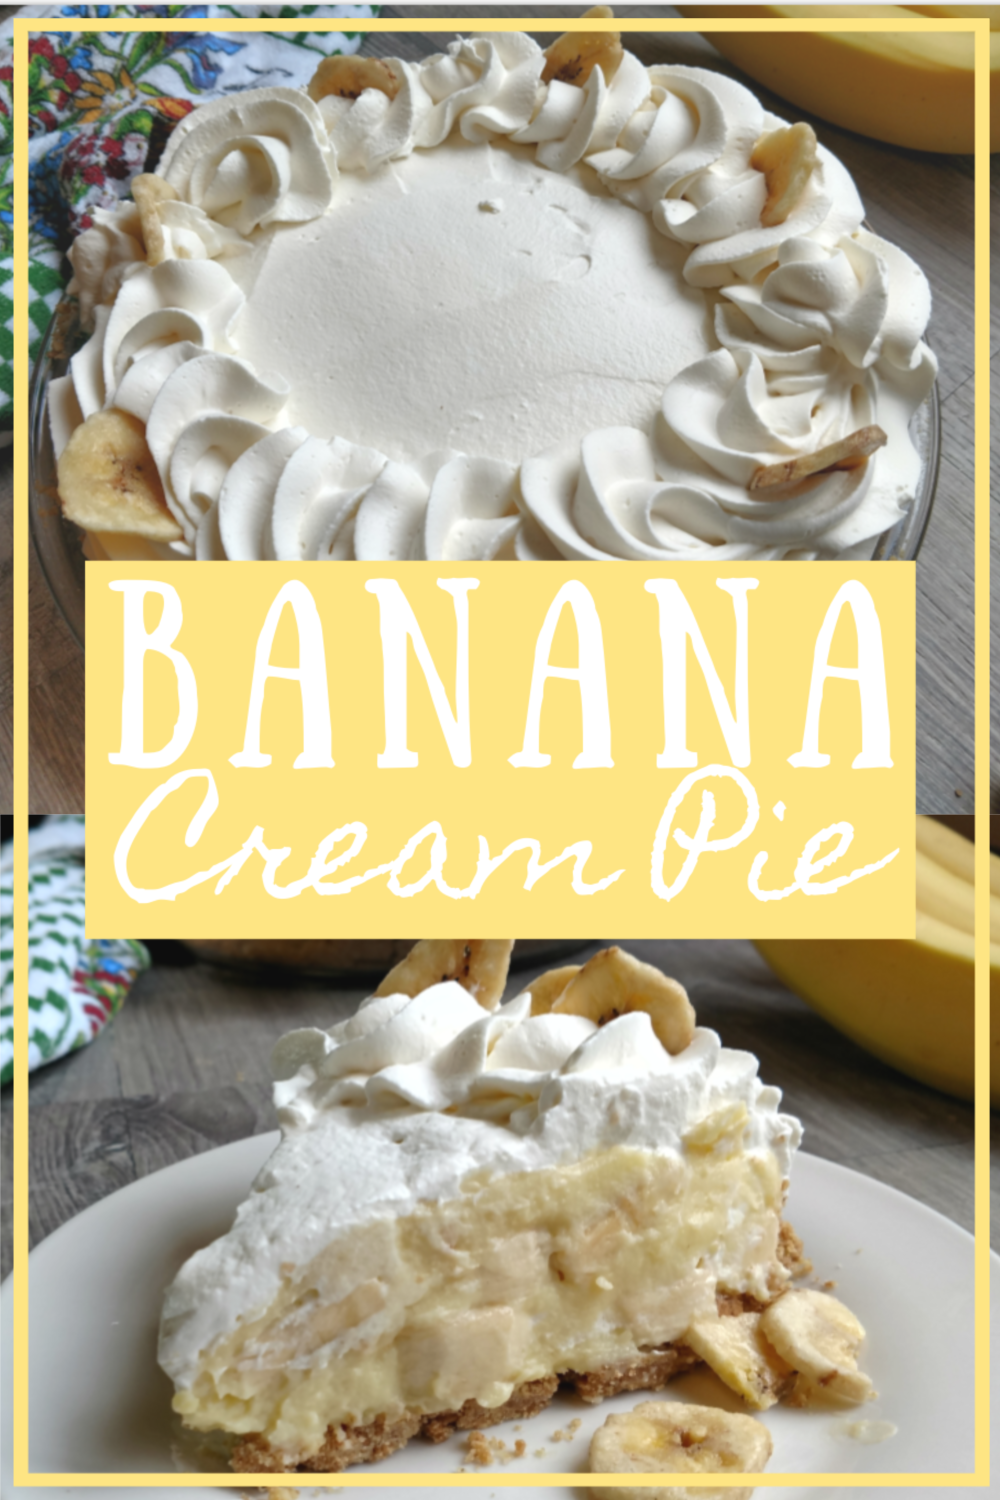 Heavenly banana pastry cream, loads of bananas, and banana-flavored whipped topping, in vanilla wafer crust; we're going bananas today!